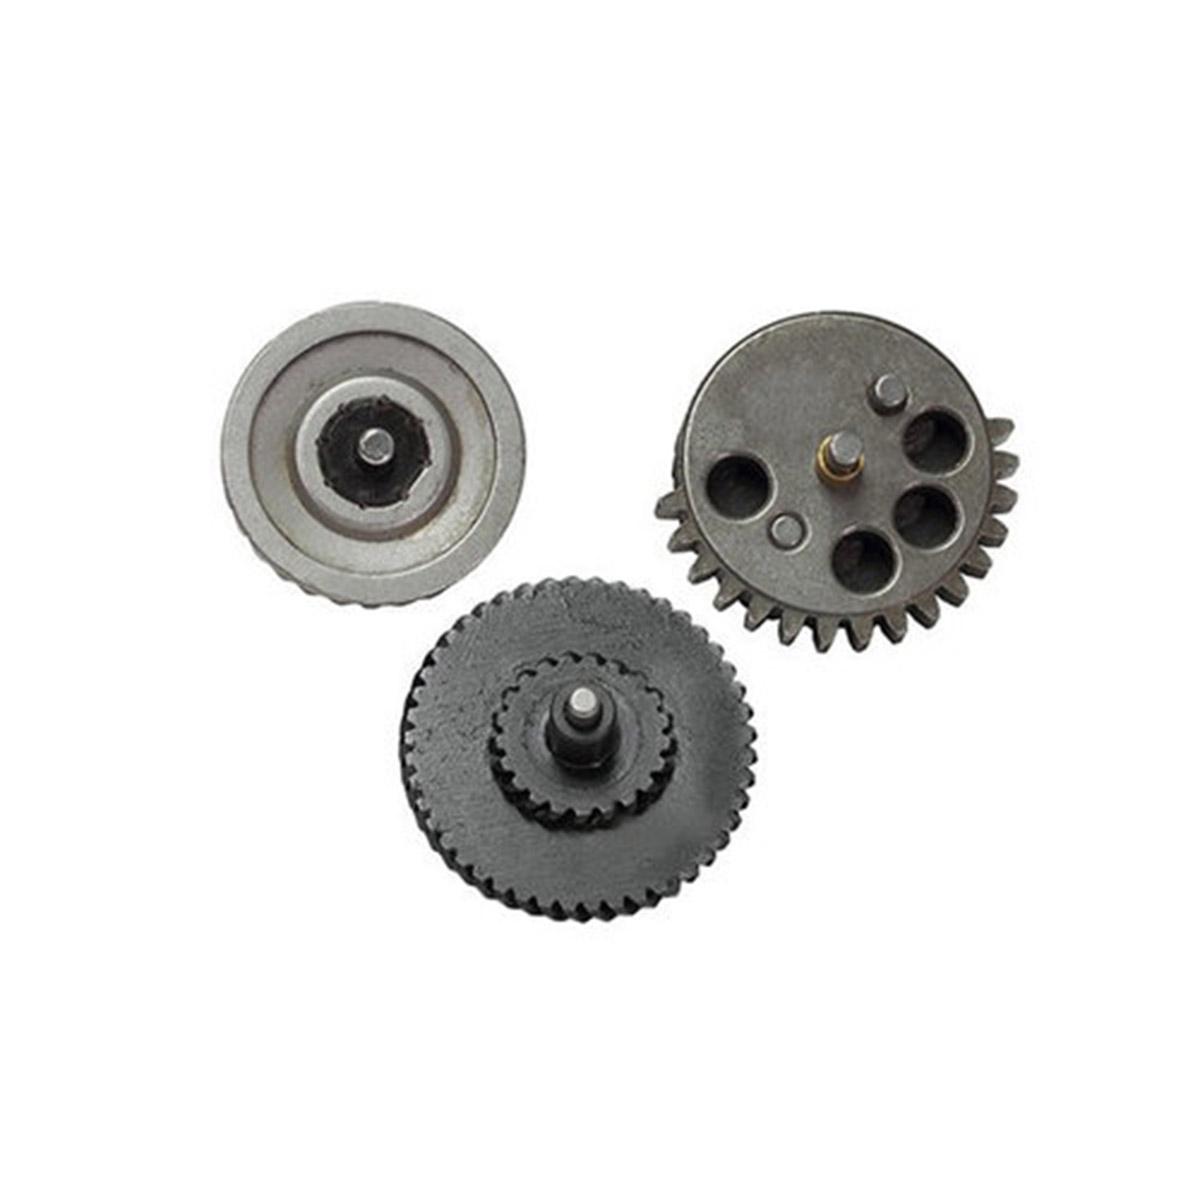 SHS Low Noise High Torque Gear Set for Gearbox V2/3 100:300 